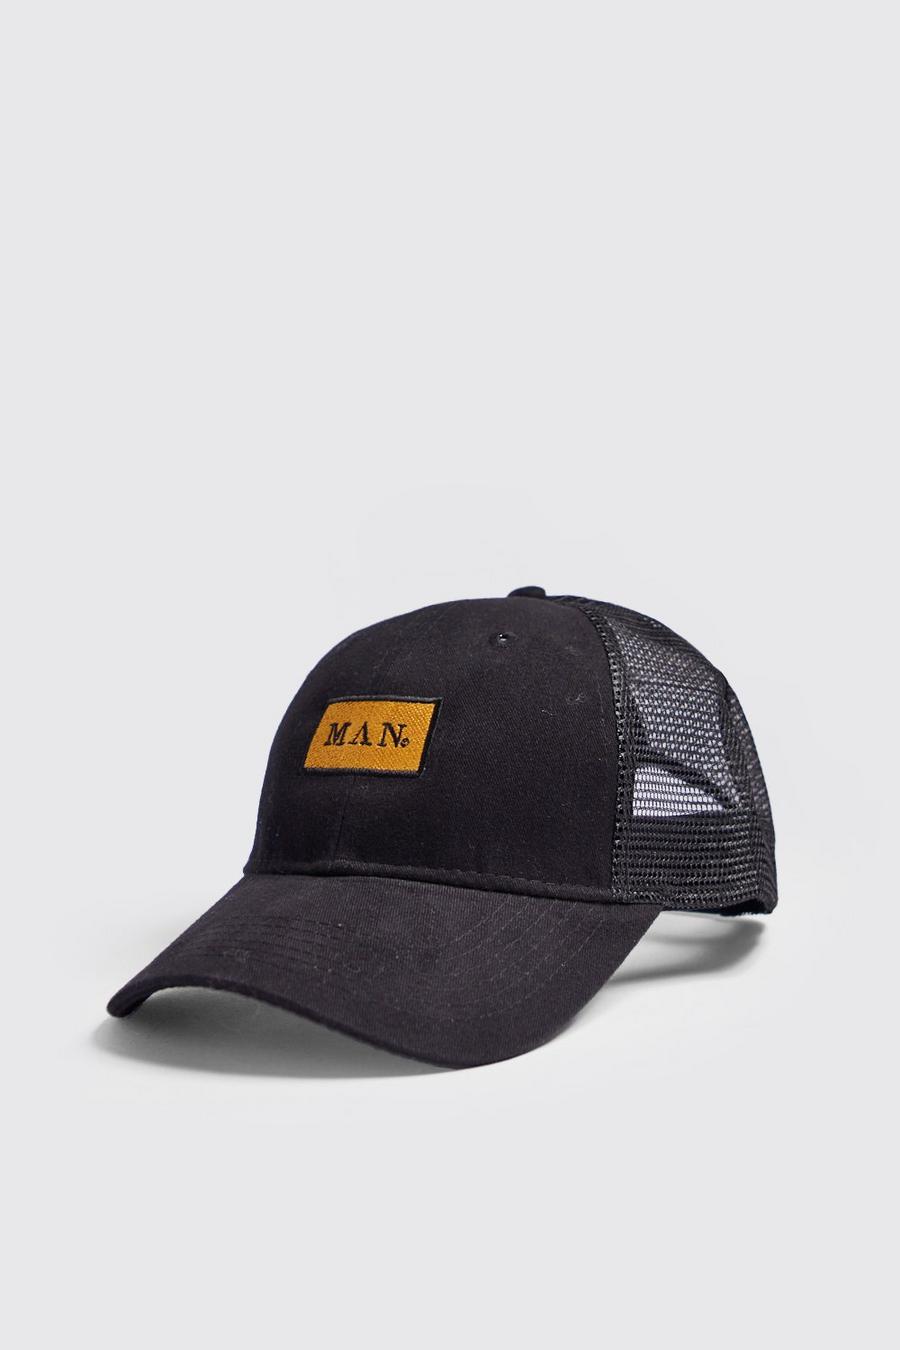 MAN Gold Box Embroidered Trucker Cap image number 1